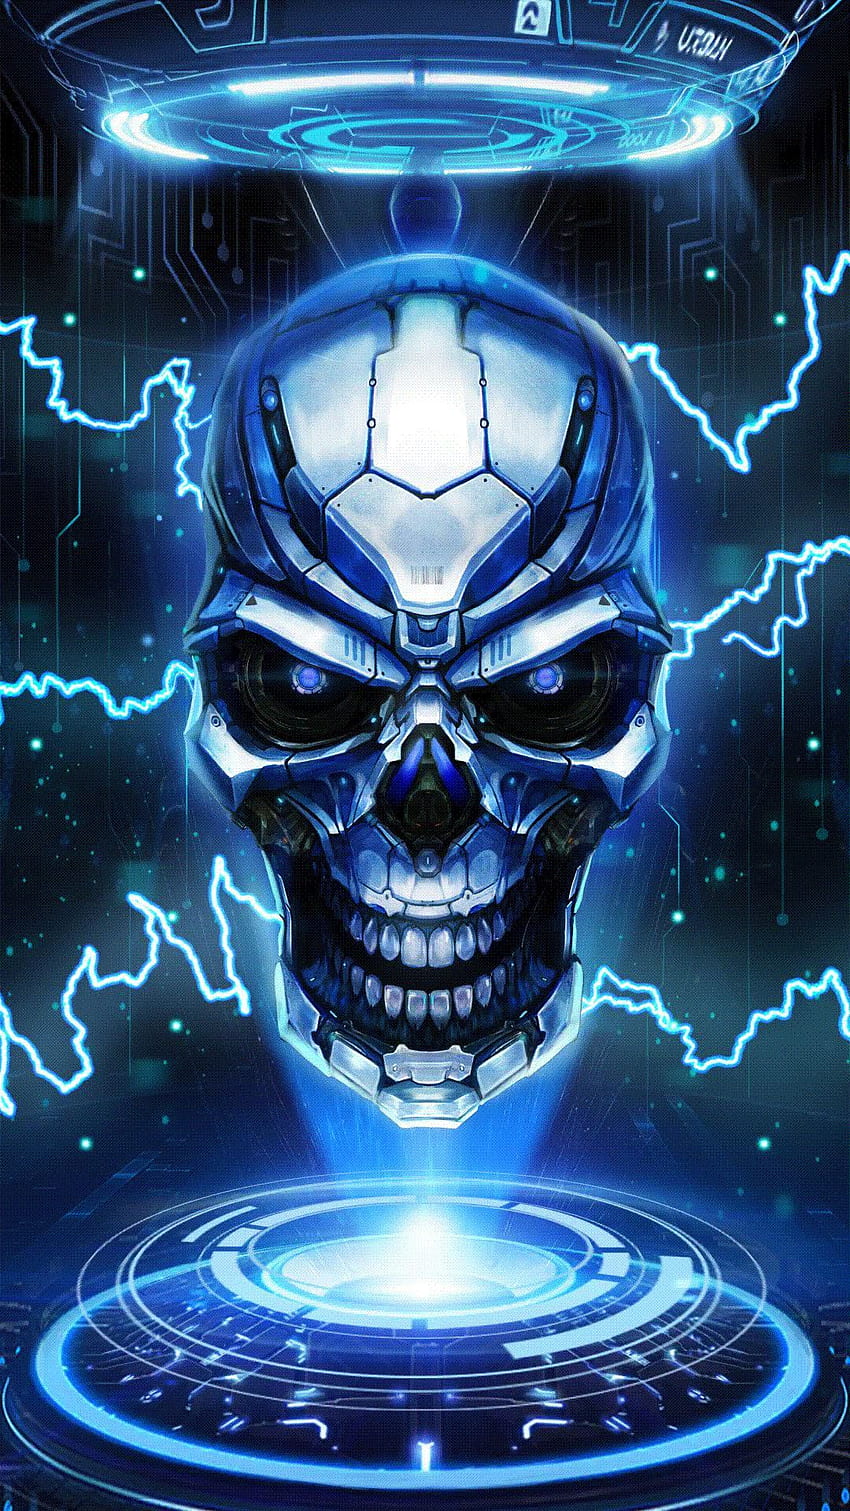 Green Fire Skull Live Wallpaper APK pour Android Télécharger